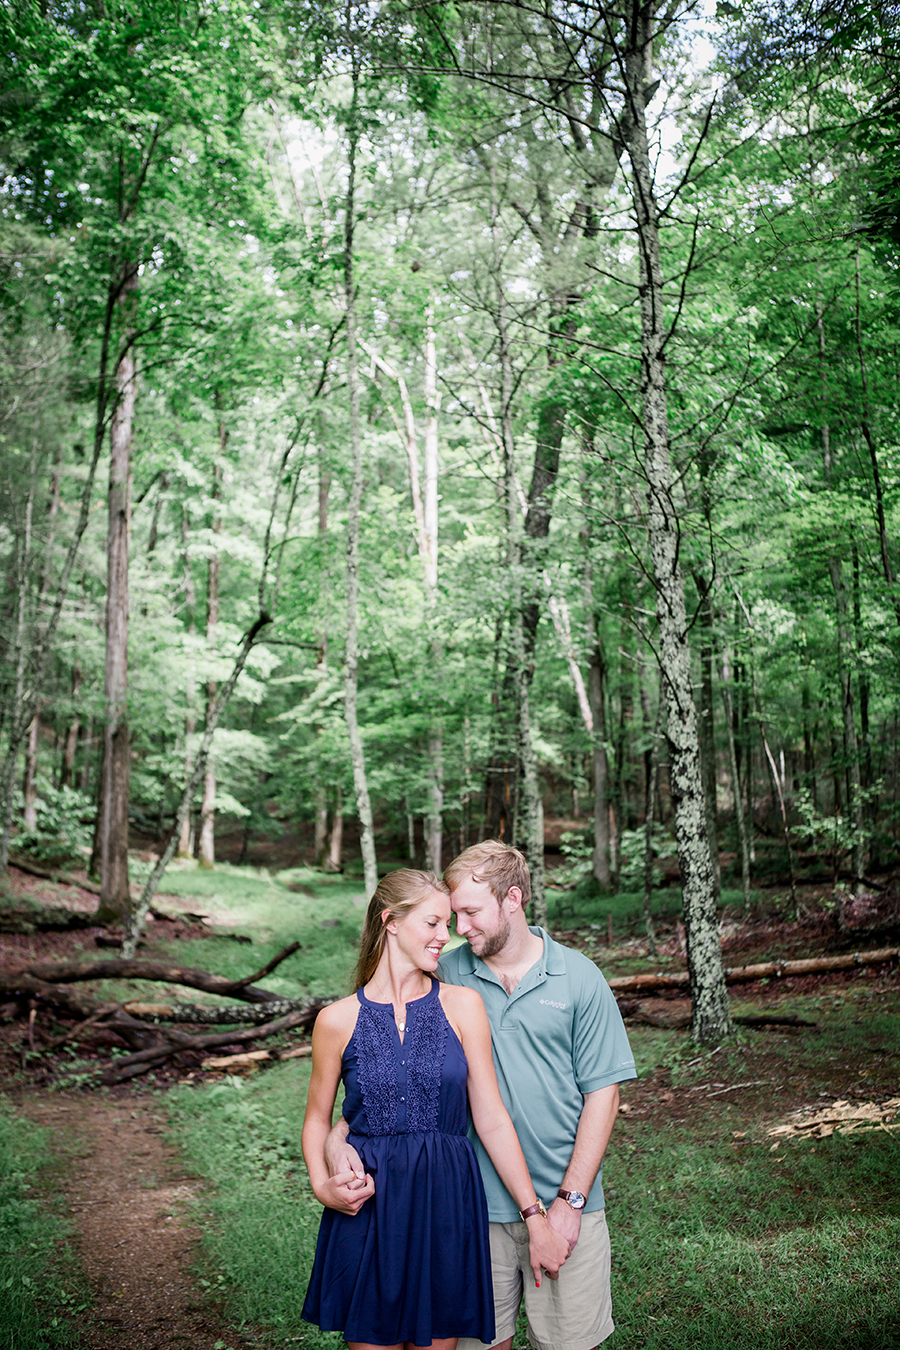 Foreheads together in the forest engagement photo by Knoxville Wedding Photographer, Amanda May Photos.